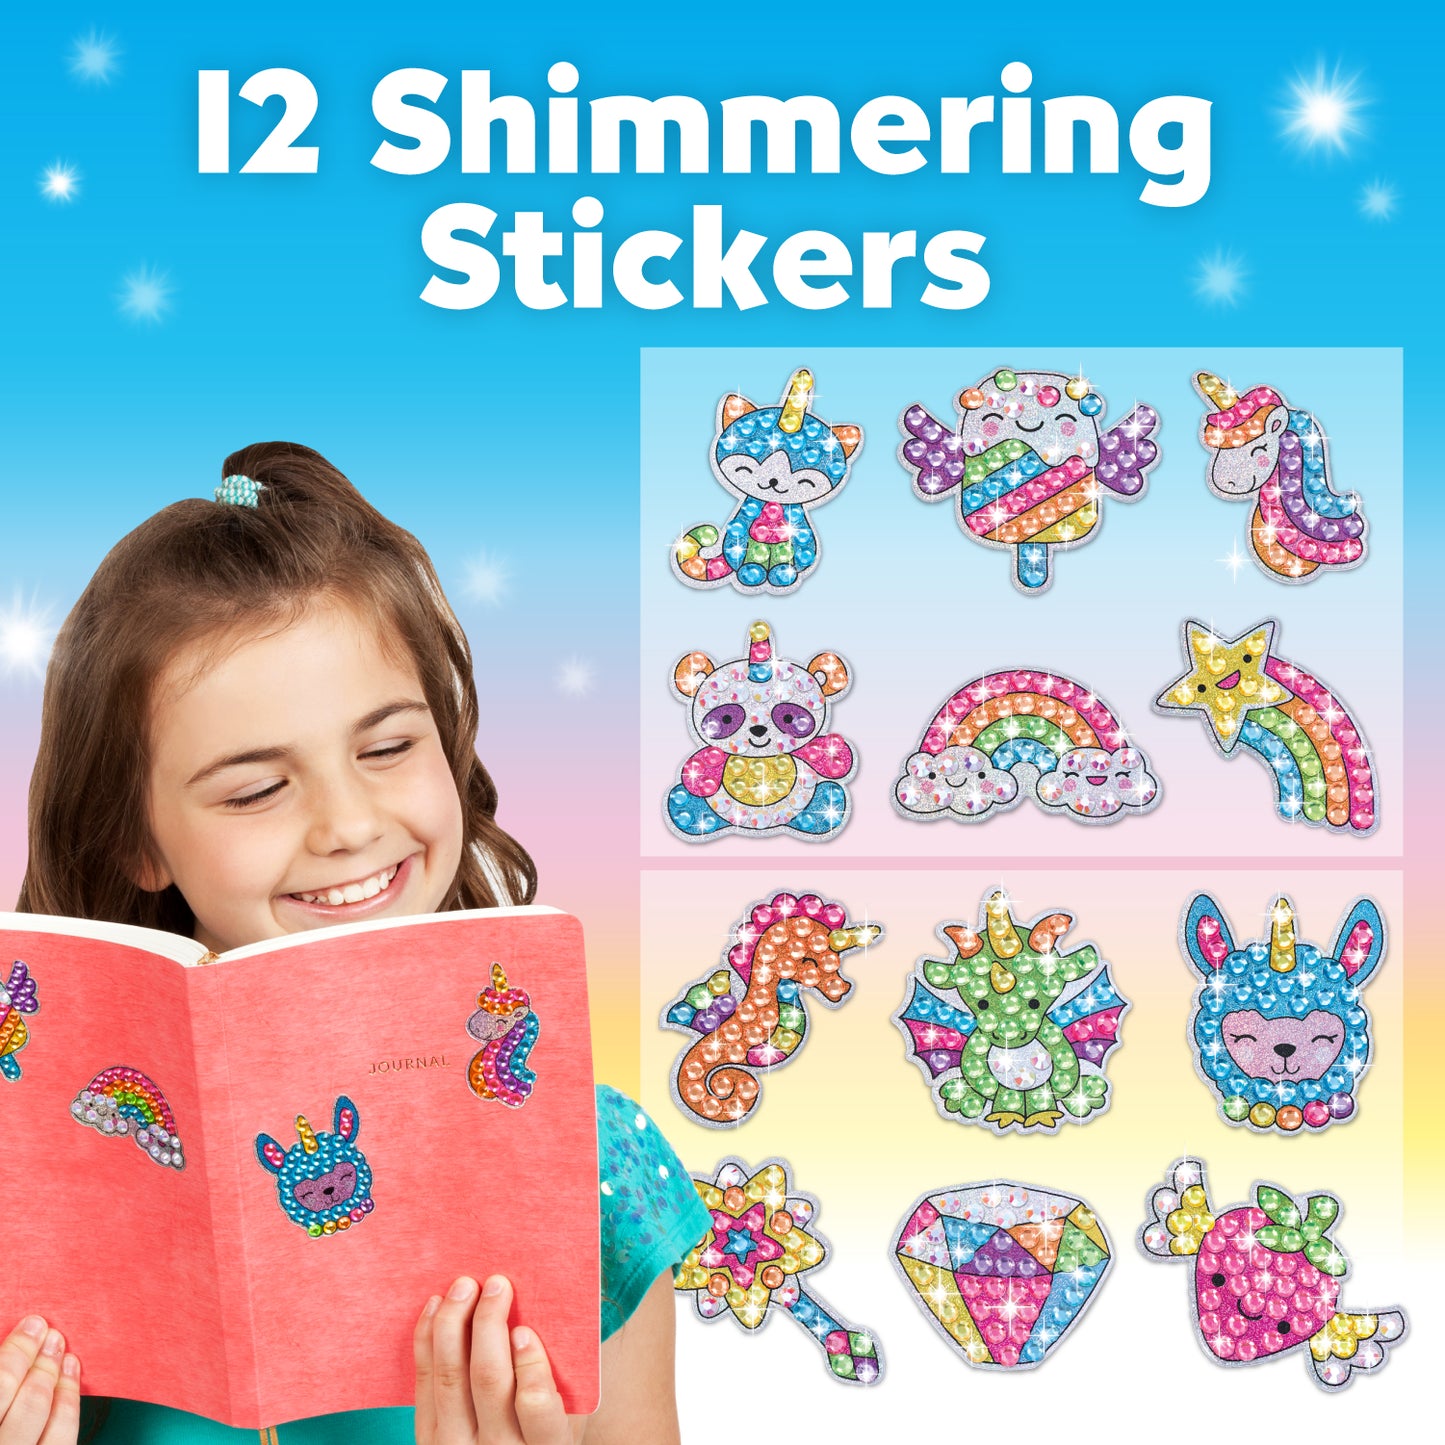 12 shimmering stickers from faber castell big gem diamond painting kit